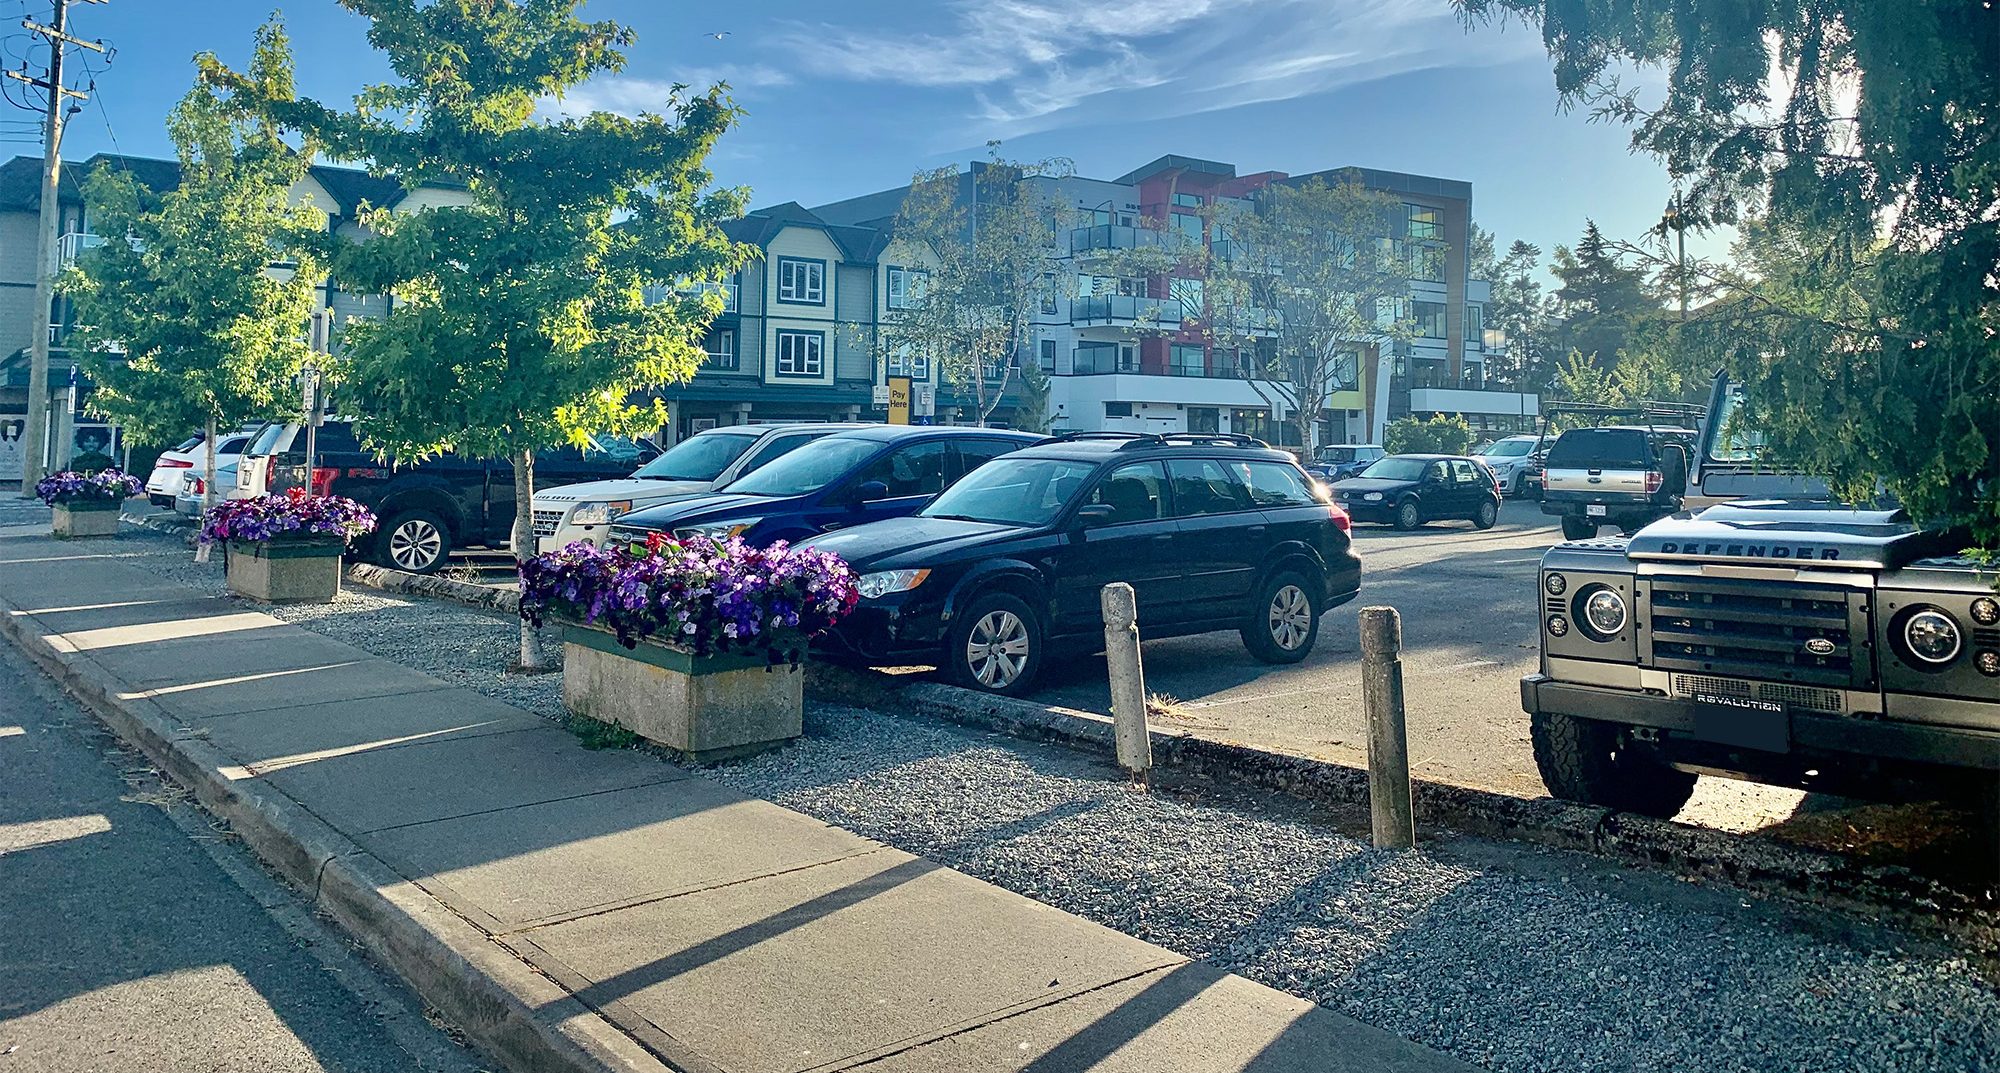 Photo of a variety of vehicles parked in Parking Lot A, with three planters full of purple flowers and a sidewalk running alongside the lot